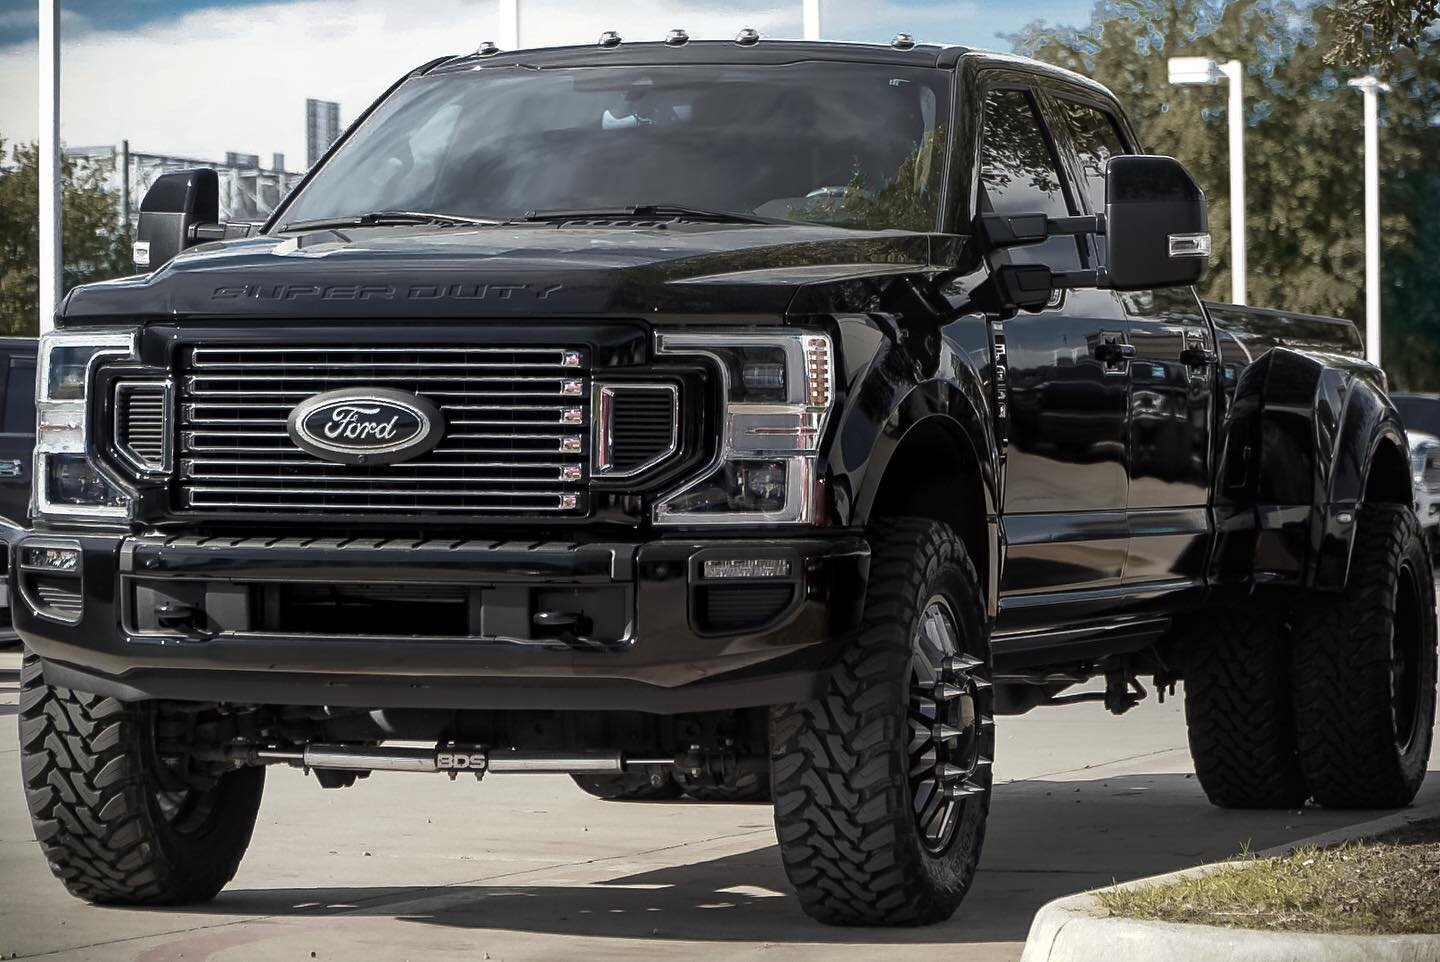 Both pending deals fell through..let&rsquo;s make the third time a charm!
-
2.5&rdquo; BDS w/ Fox 2.0 Shocks
22&rdquo; Dually Design Co Wheels
37x12.50R22LT Toyo M/T Tires
And painted grille insert and accents
$89,991 AVAILABLE NOW @Hurst.Autoplex!
&